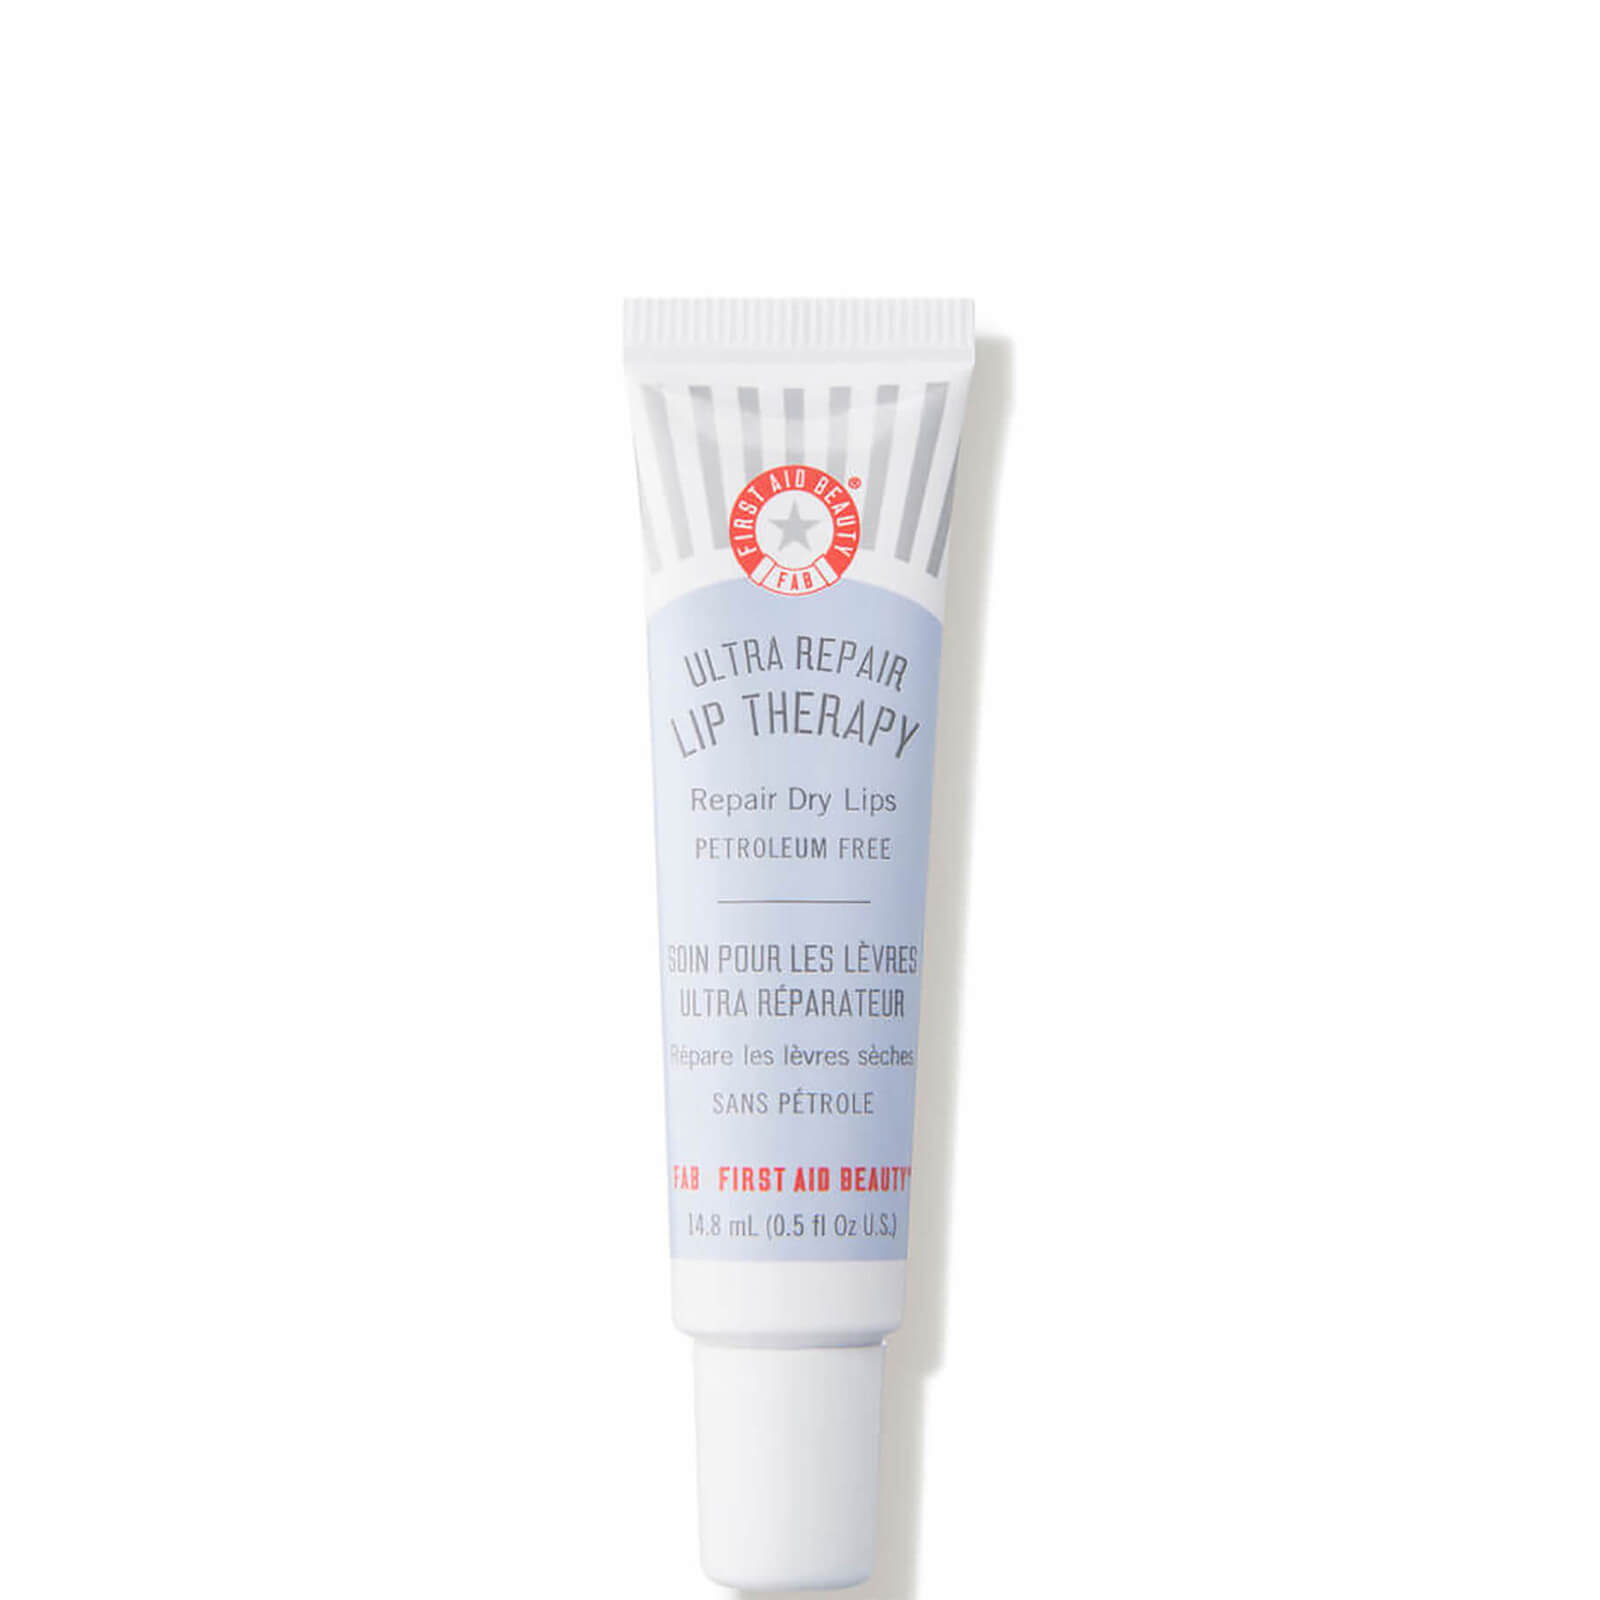 Photos - Cream / Lotion First Aid Beauty Ultra Repair Lip Therapy 14.8ml 249